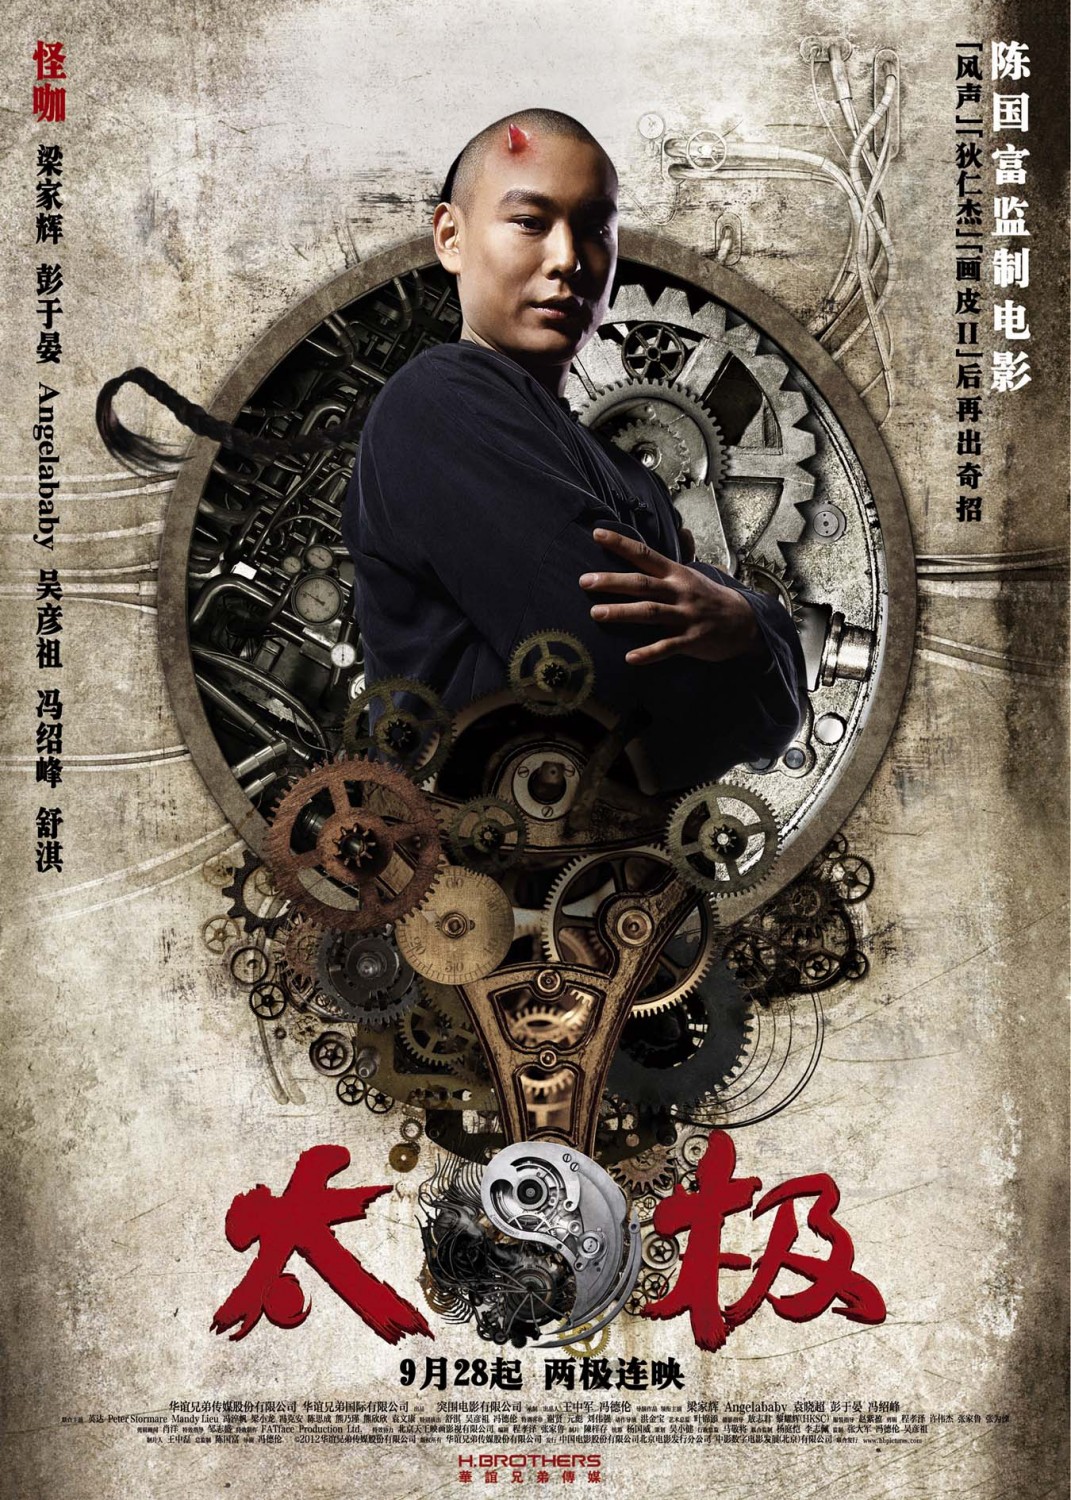 Extra Large Movie Poster Image for Tai Chi 0 (#10 of 16)